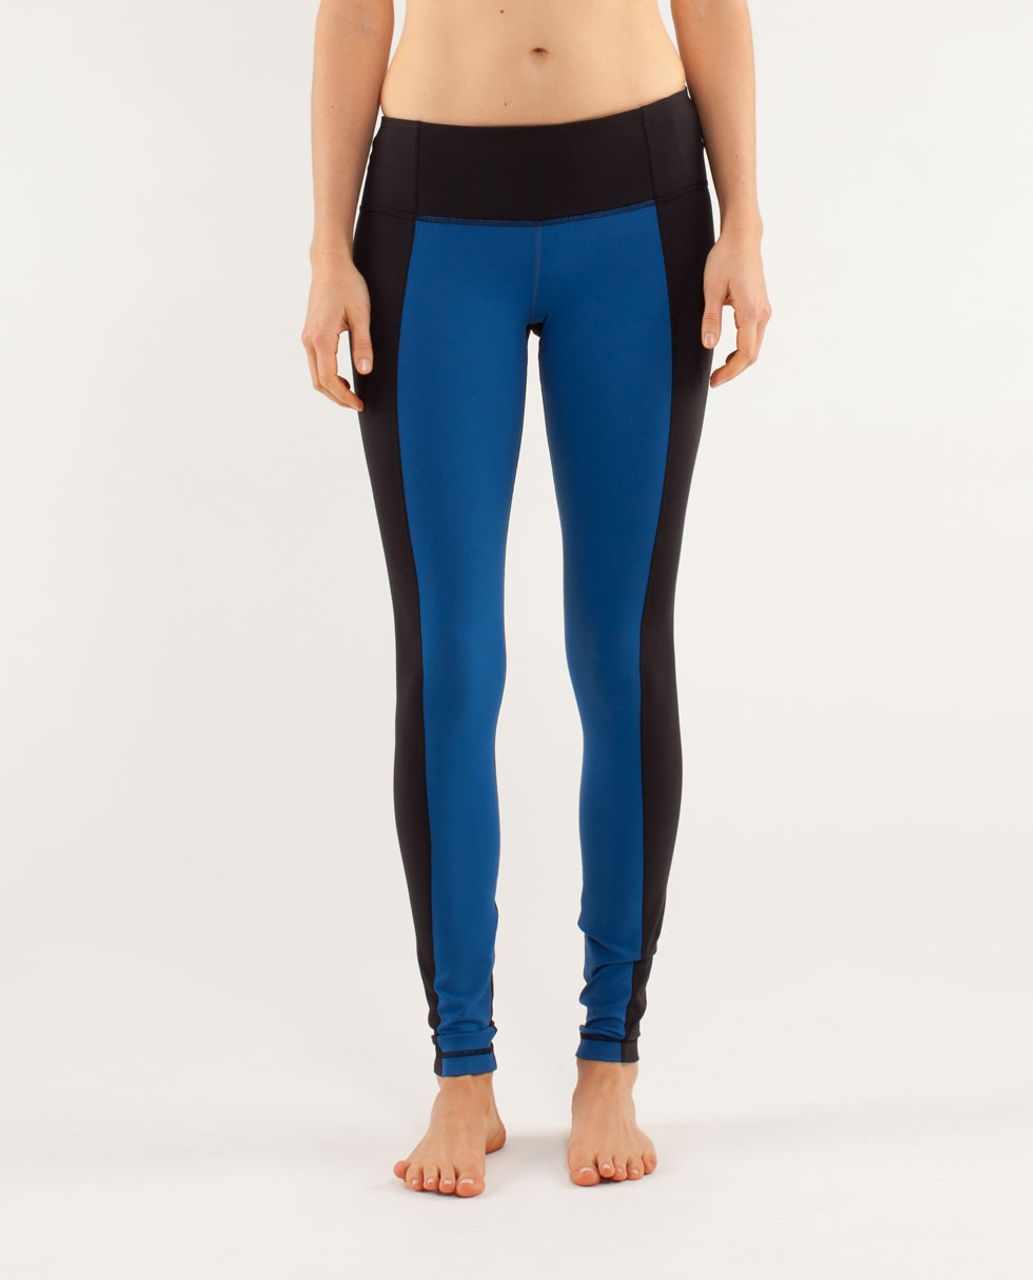 Lululemon Wunder Under Pant *Colour Blocked - Limitless Blue / Black / Wee Are From Space Polar Cream Clarity Yellow